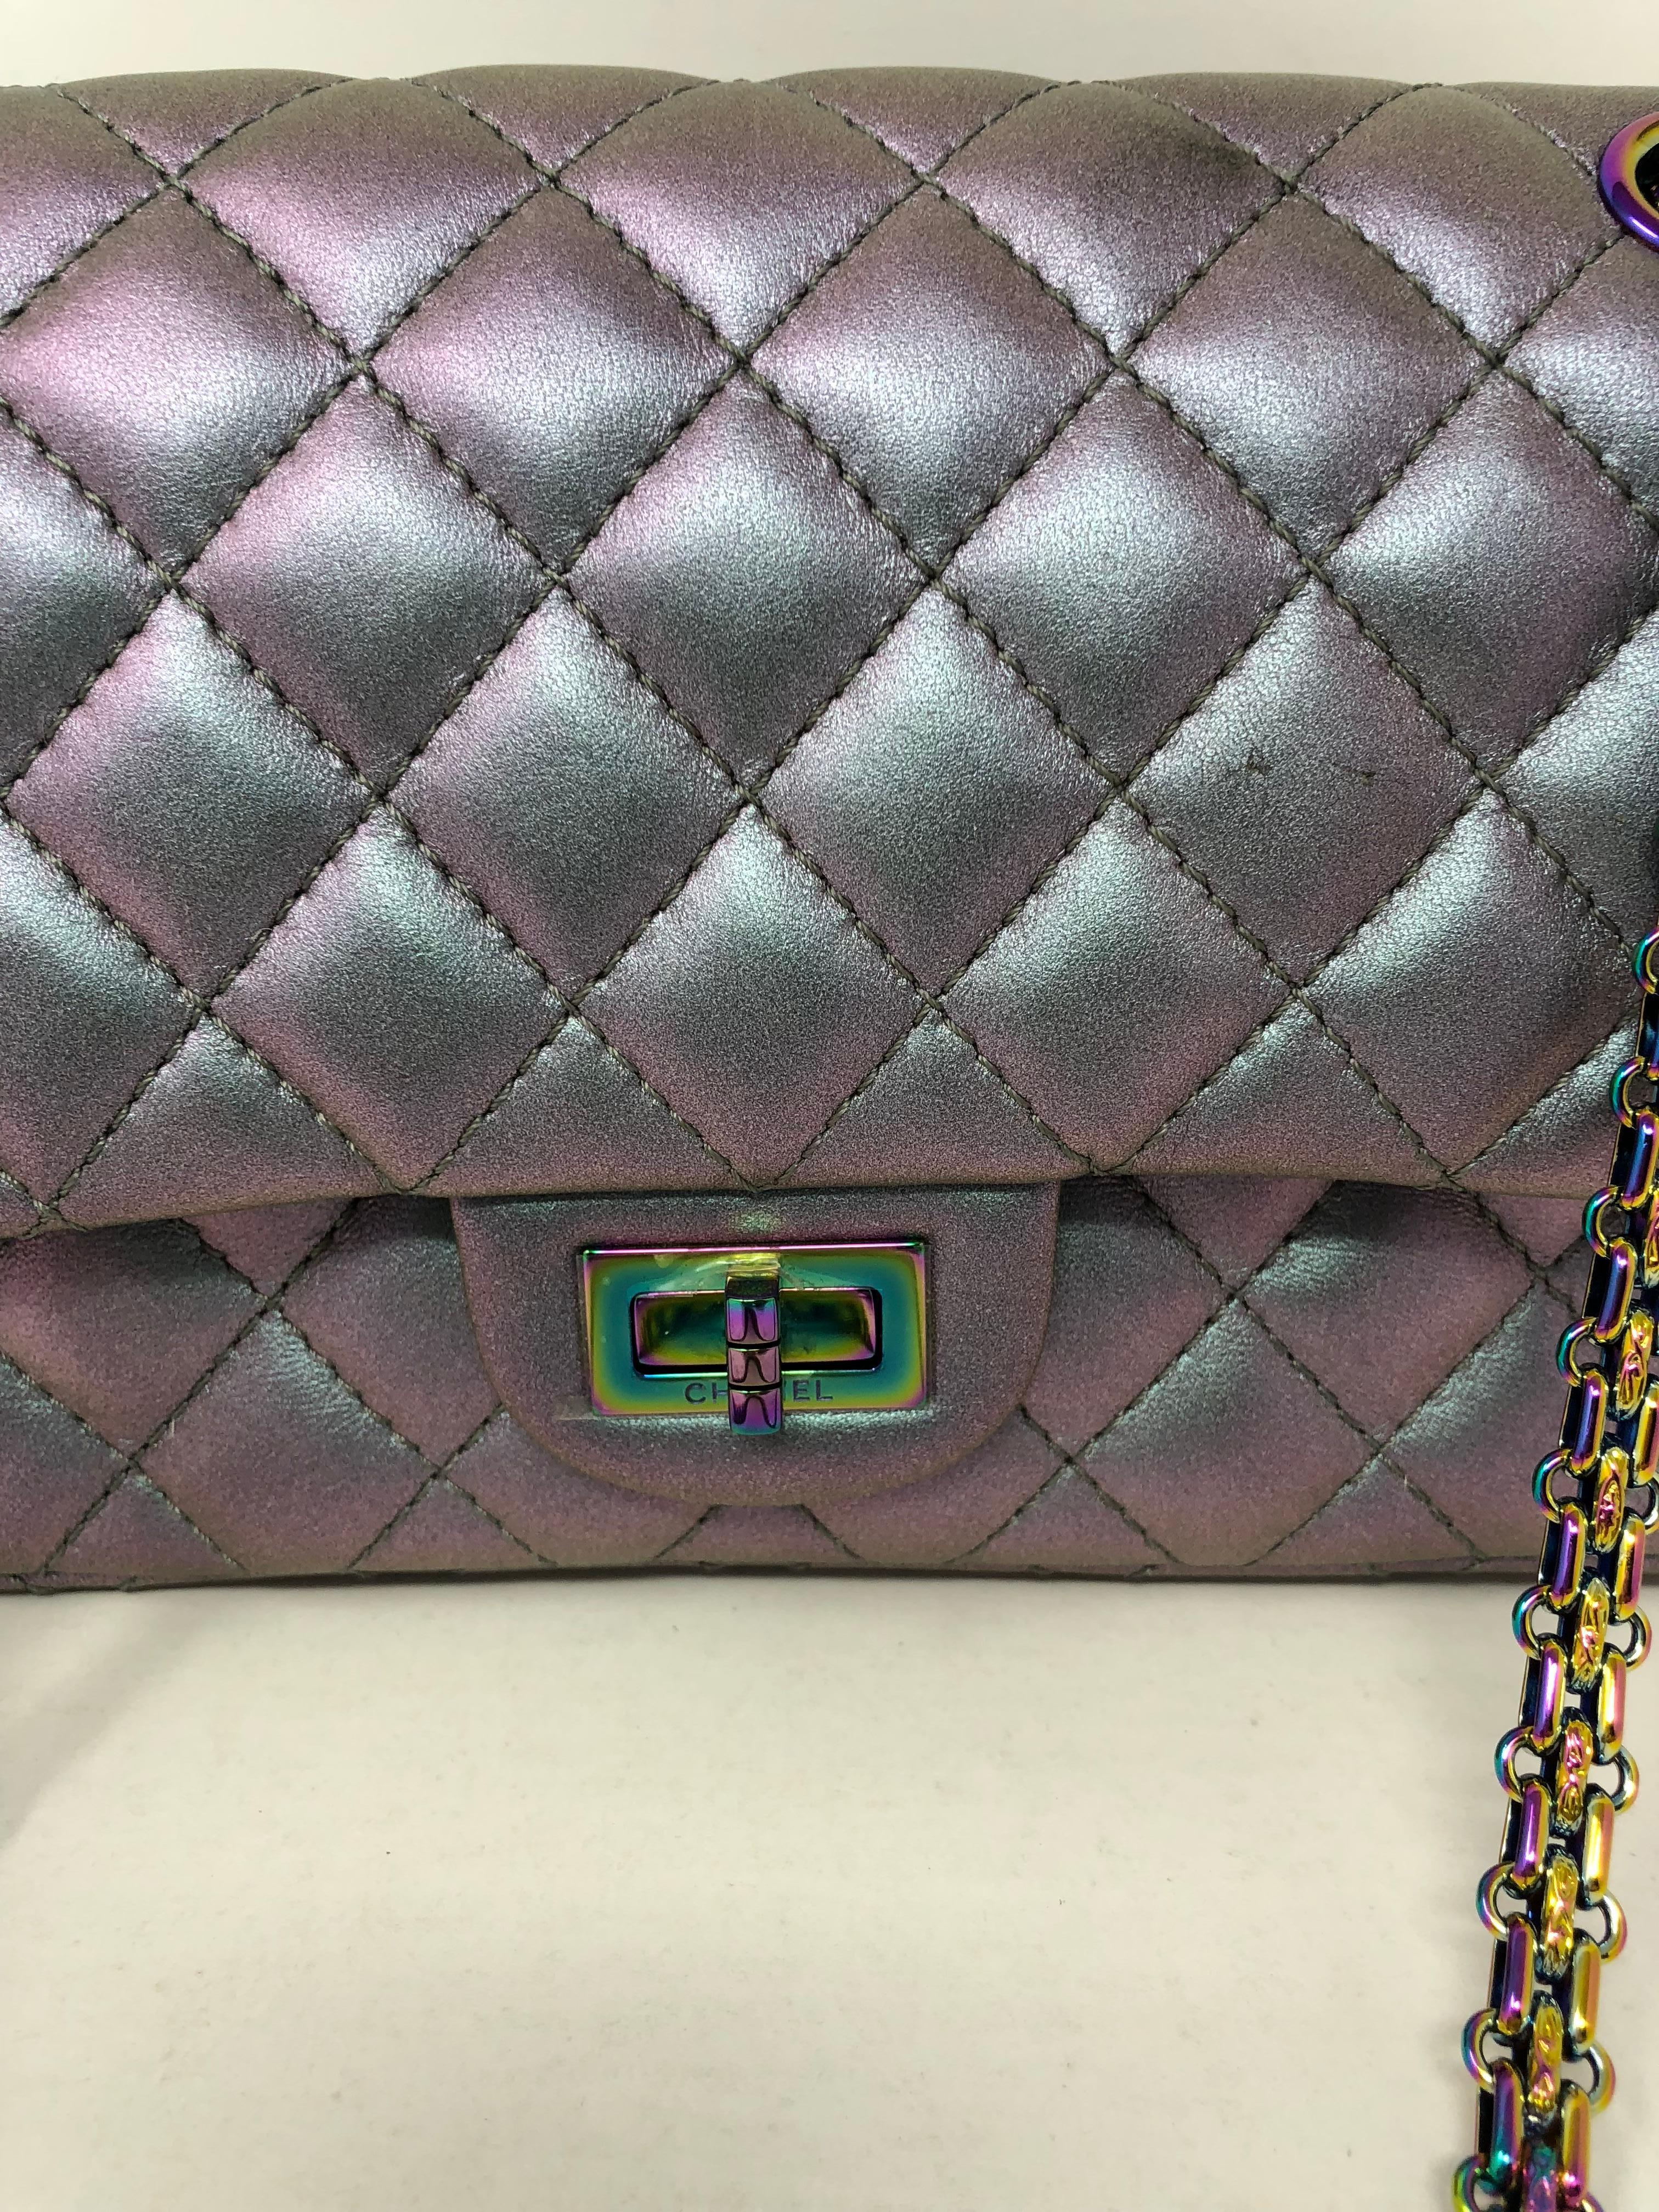 Chanel Iridescent Double Flap 2.55 Reissue Bag. Light Purple tones and metallic chain in Iridescent. Lambskin leather bag. Size is 226 and in the Reissue. Rare collector's piece. 